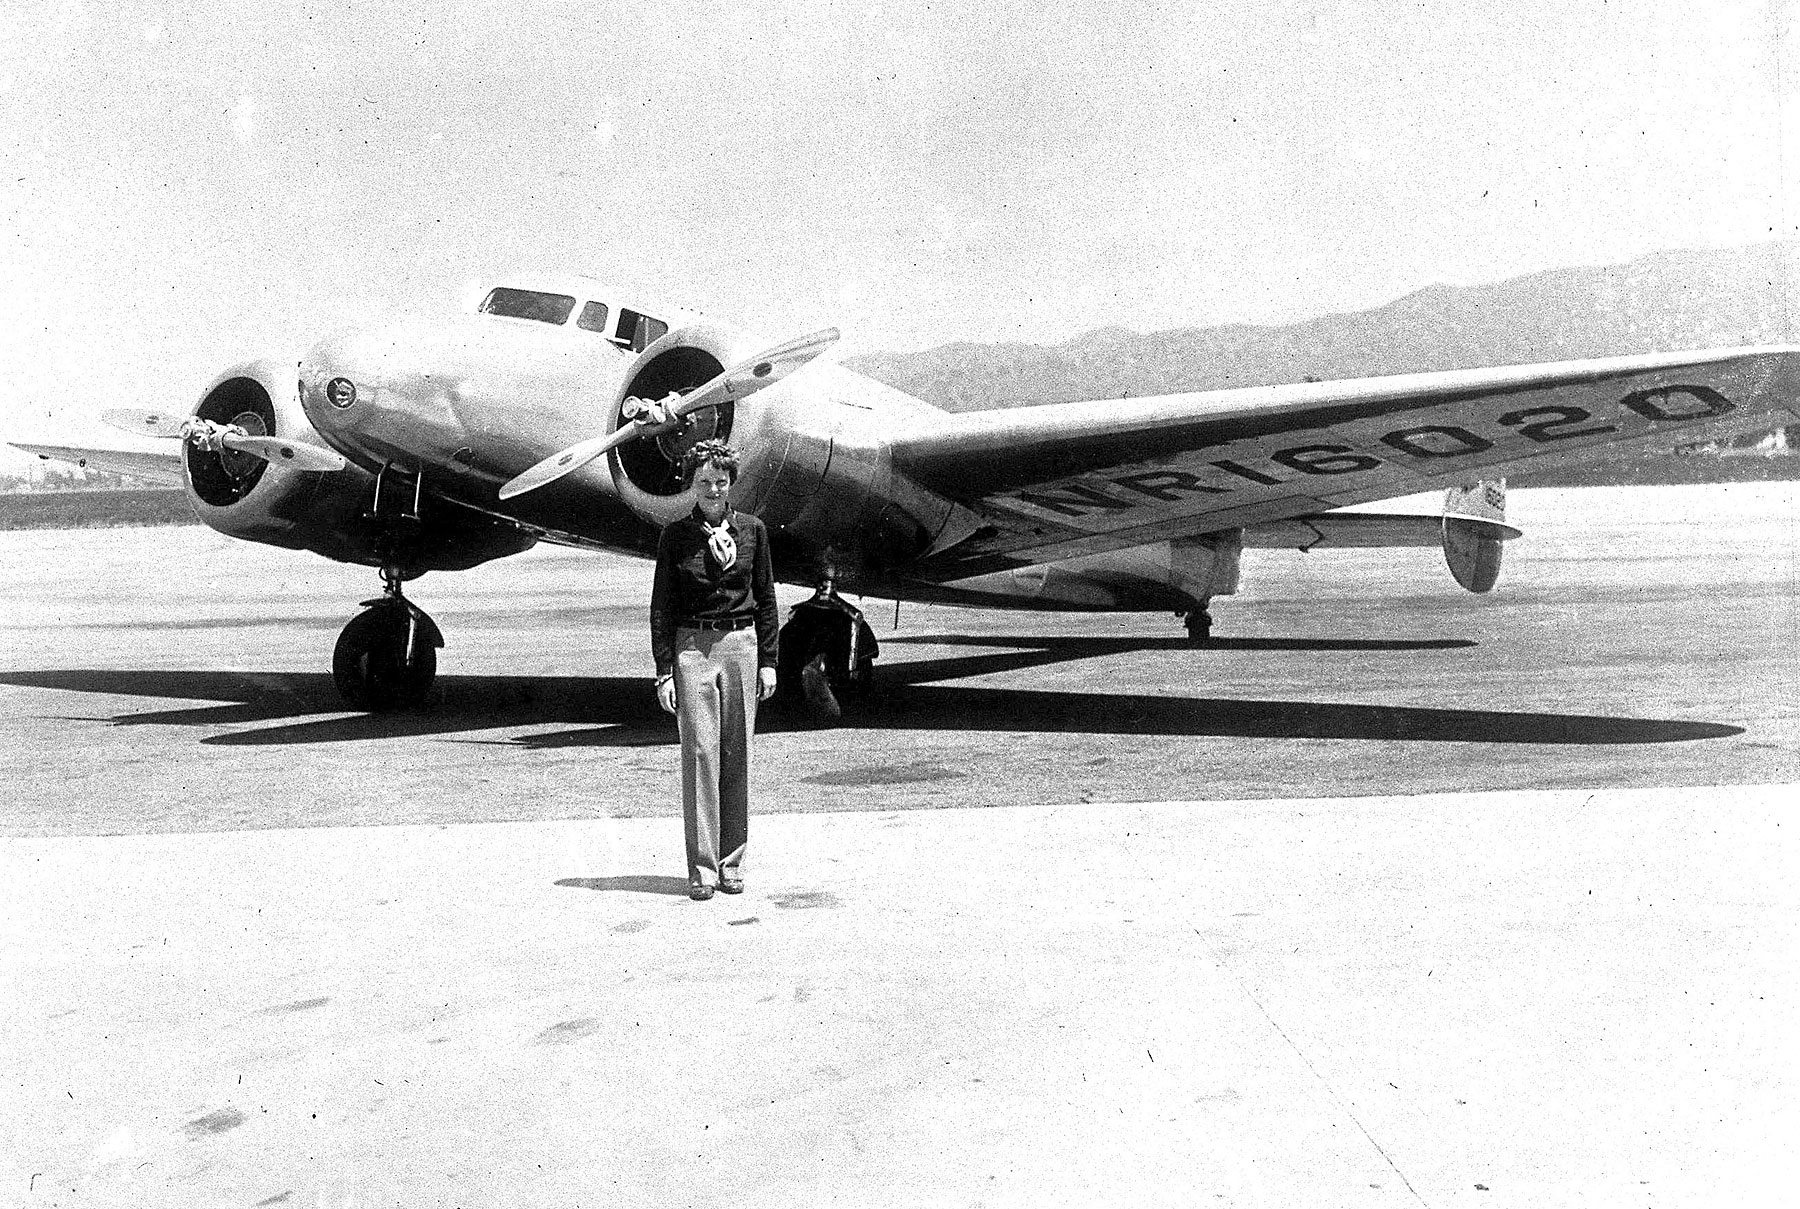 Amelia Earhart is pictured with her Flying Laboratory in which she attempted to fly around the world from Oakland, Ca.